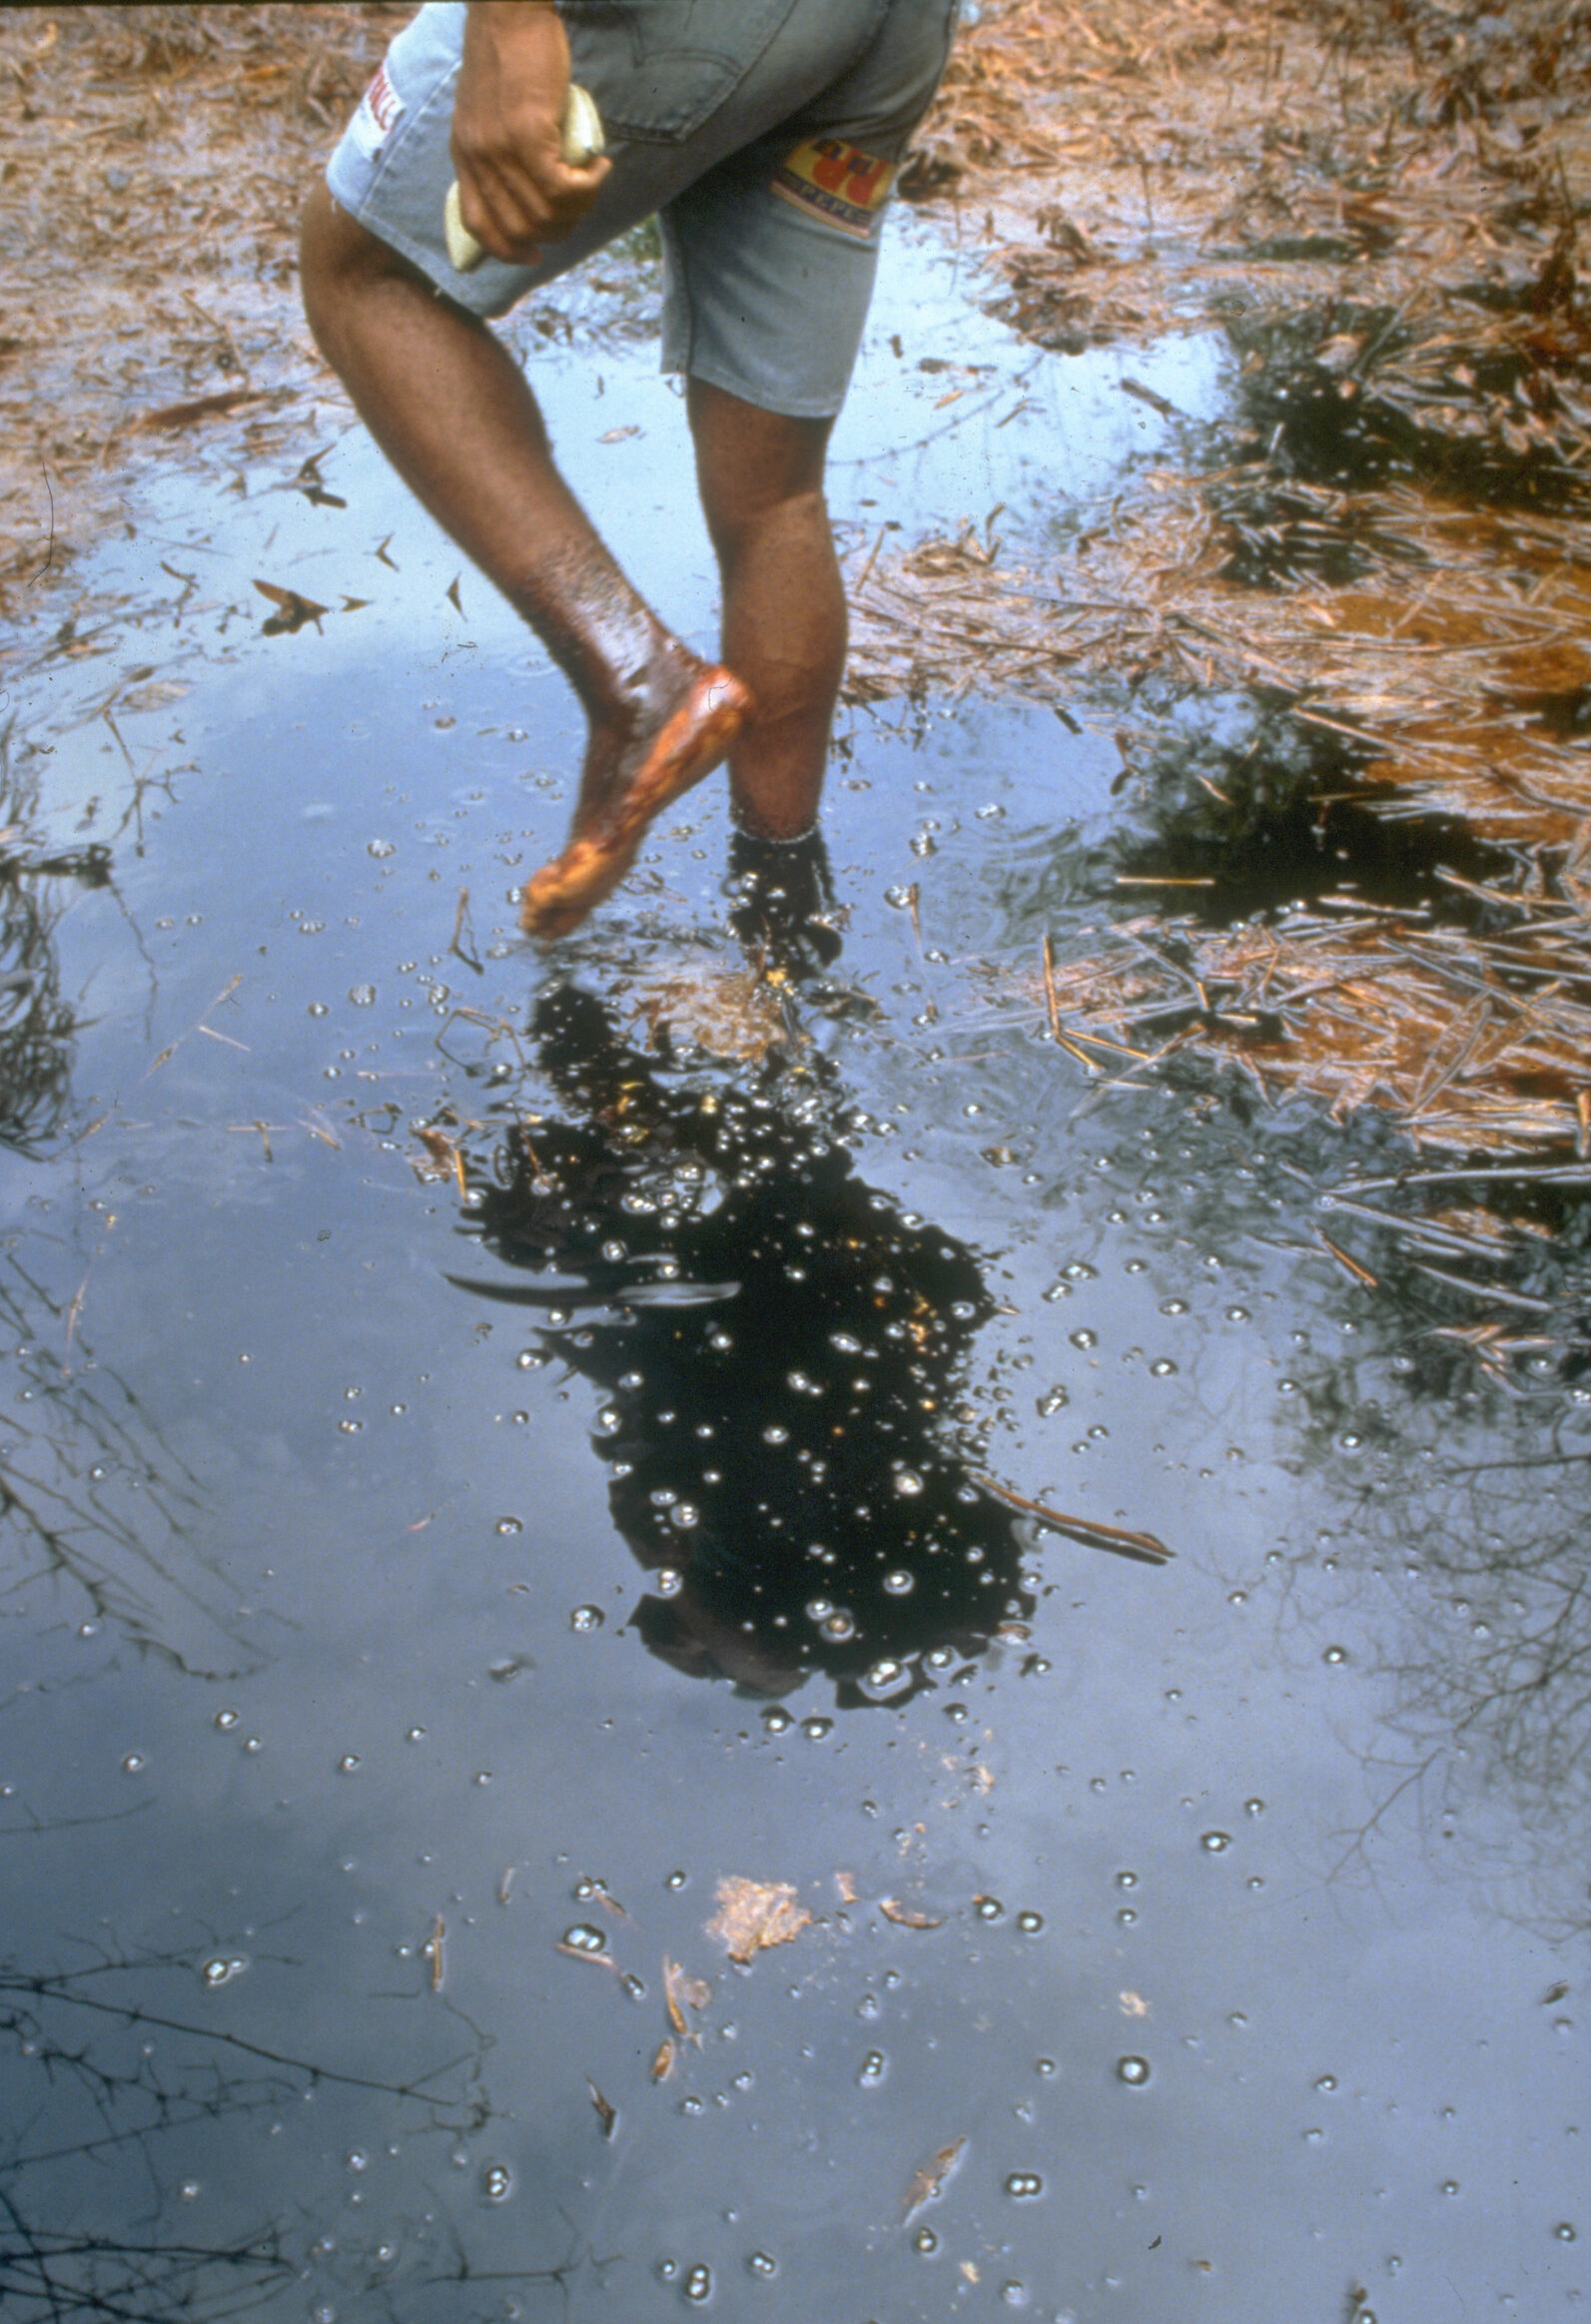 Legs and feet of a Black person walking barefoot through shallow water thickly coated with oil.